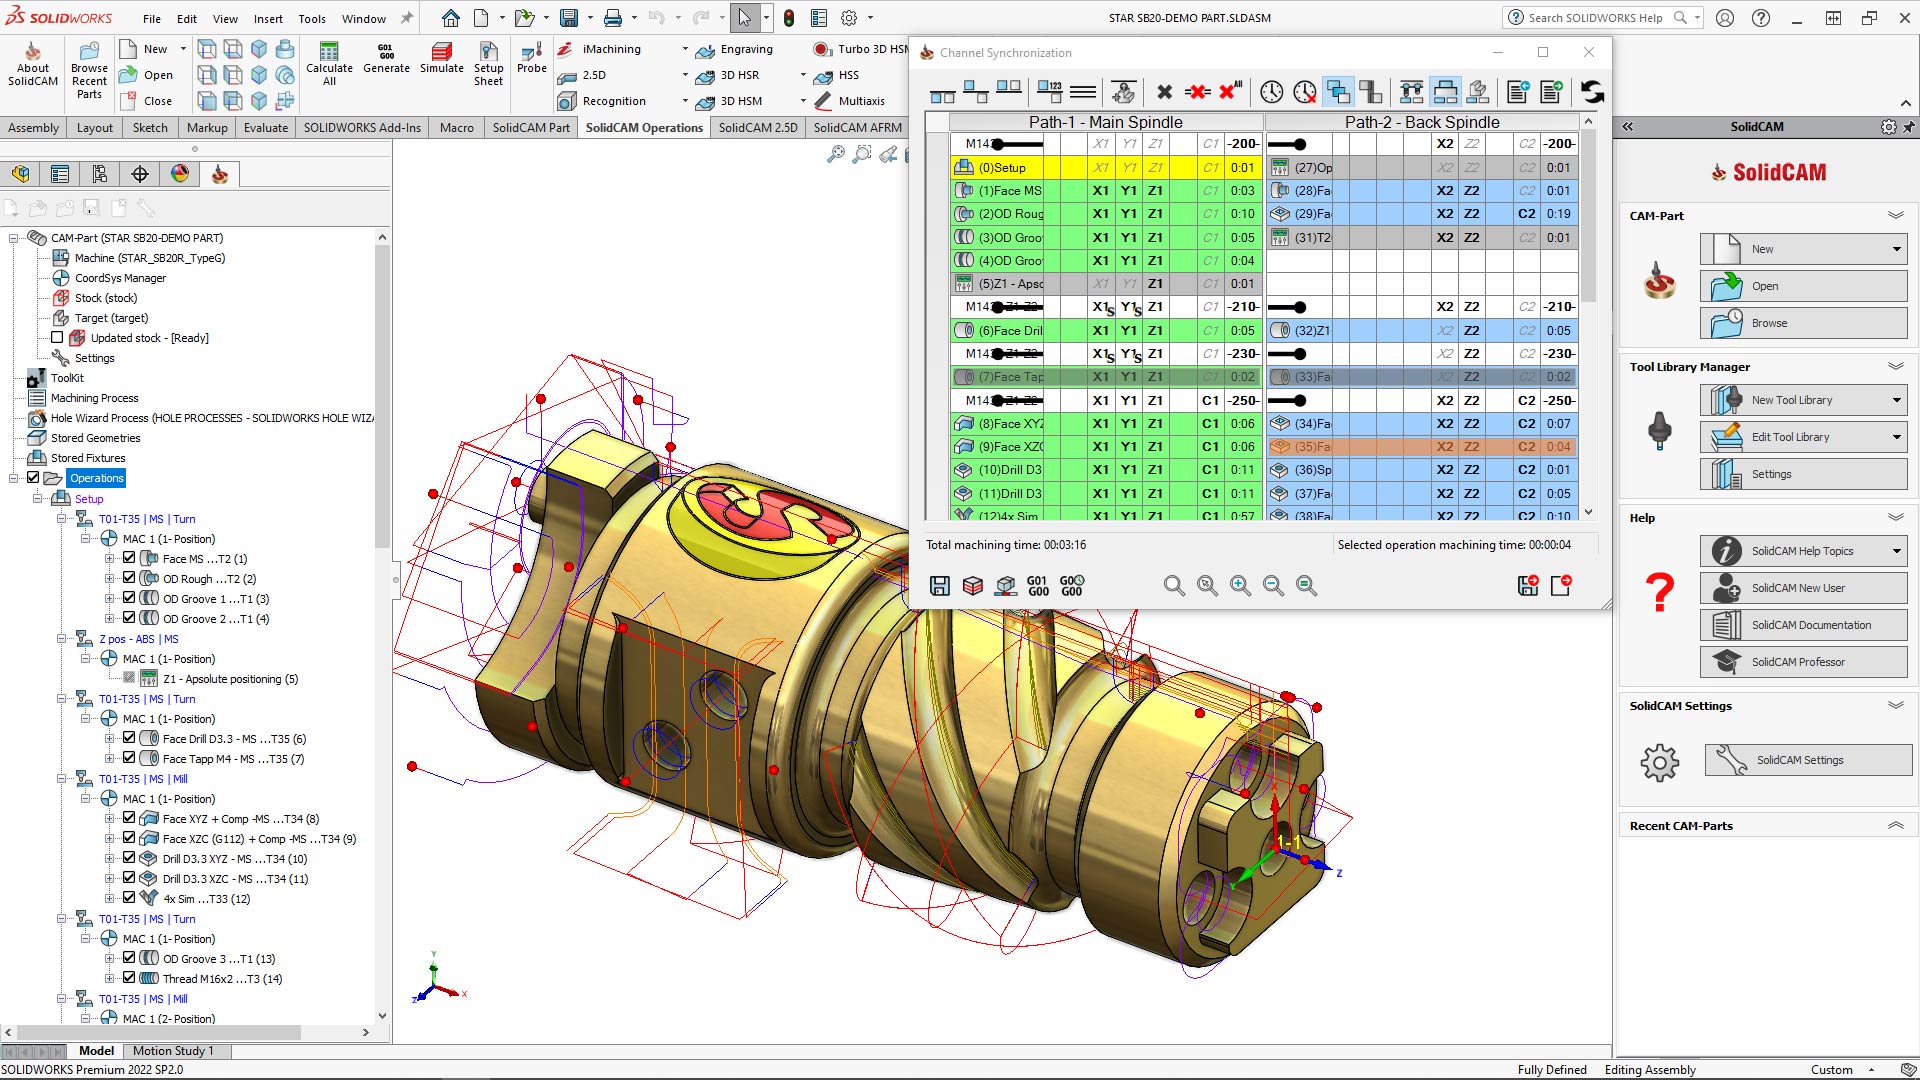 SolidCAM Swiss Machining software with Channel Synchronization